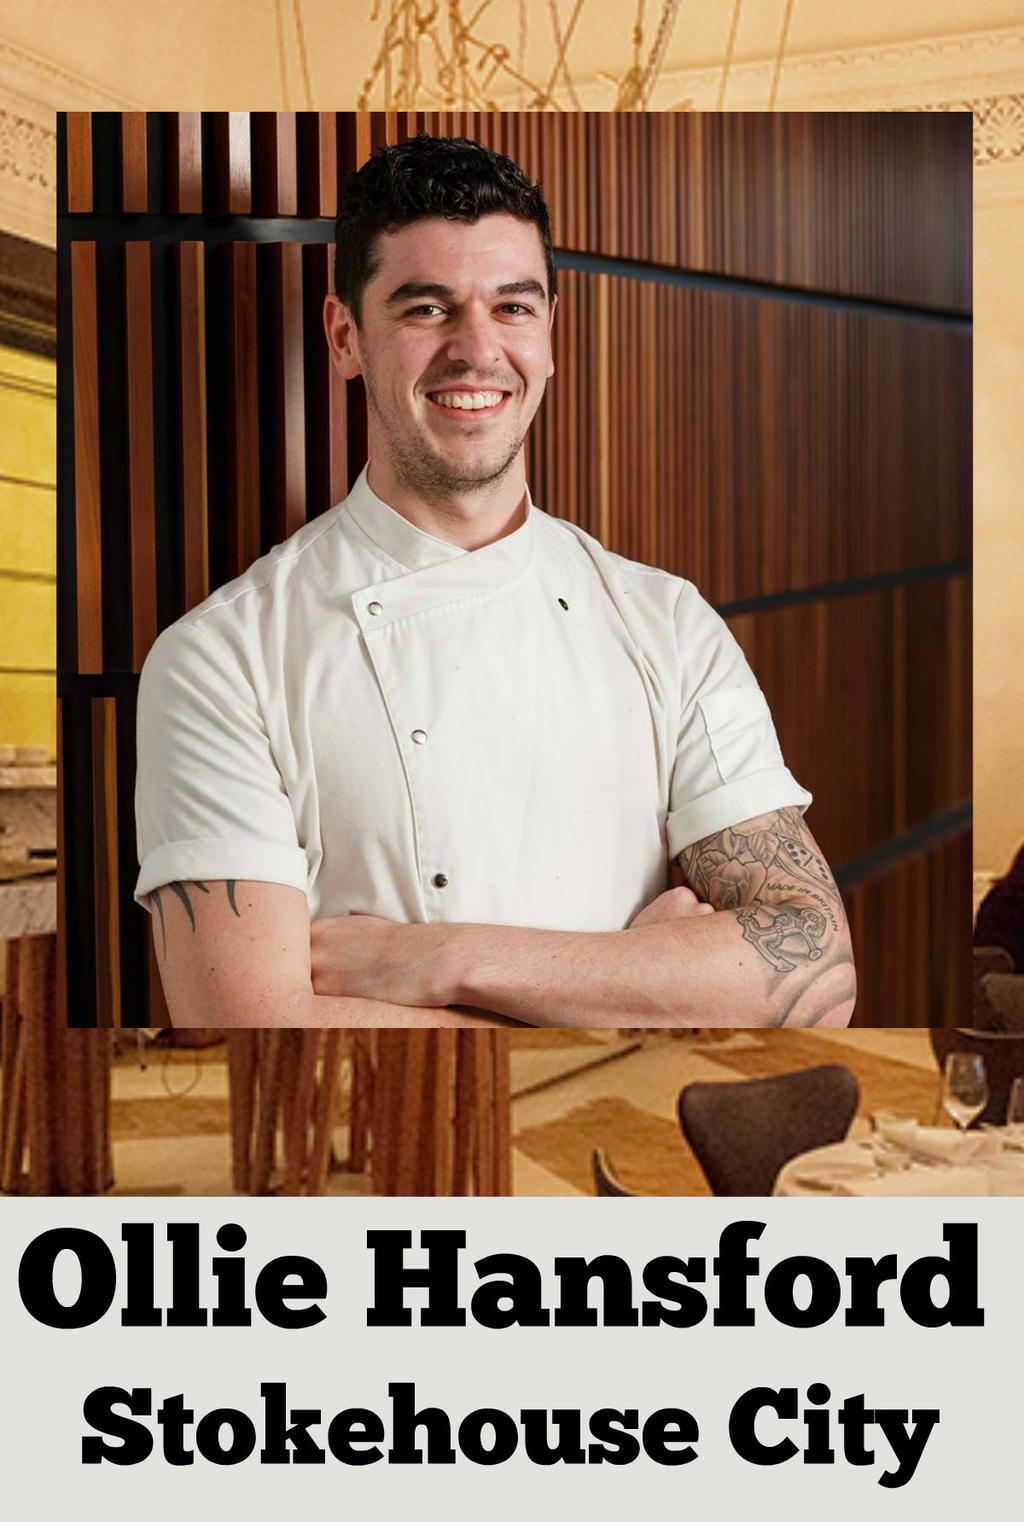 masterclasses 11 class date 9 May cost $105 Young Chef of the Year (2016 Brisbane Times Good Food Guide), English-born Ollie Hansford, trained in Michelinstarred restaurants in Europe and is